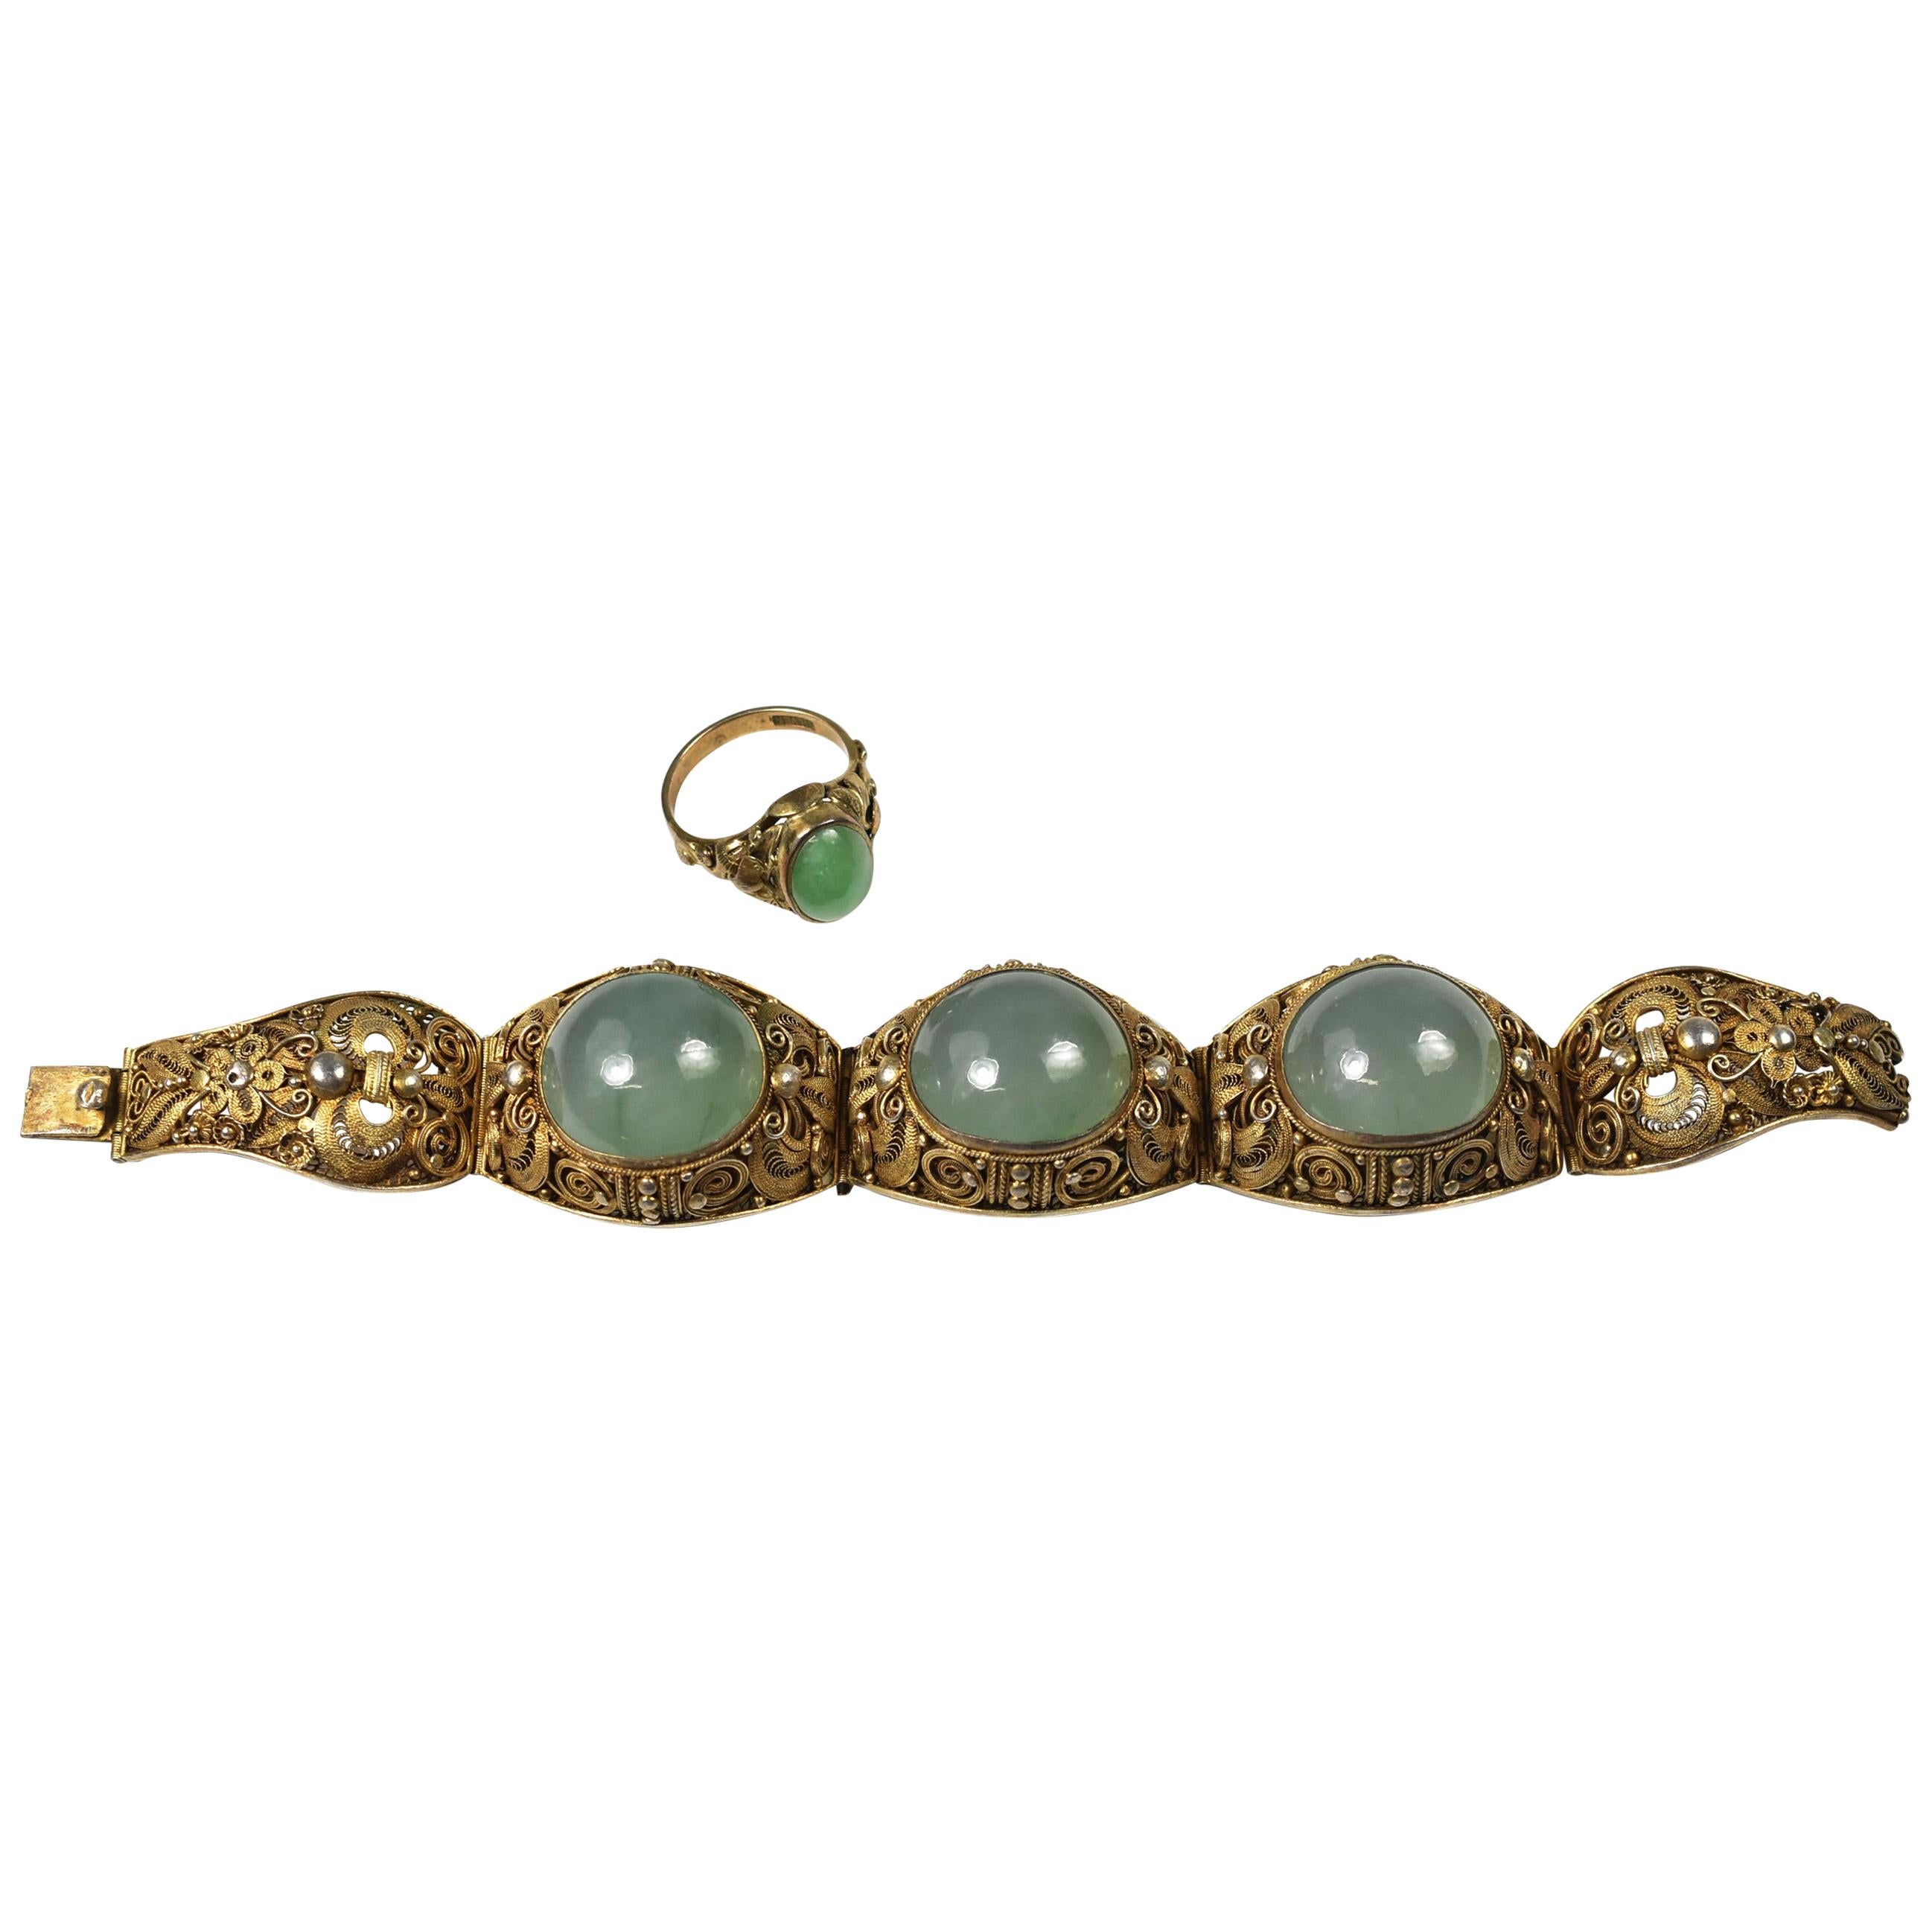 Chinese Style 835 Silver Gold Vermeil Filigree Bracelet&Ring with Jade Cabochons